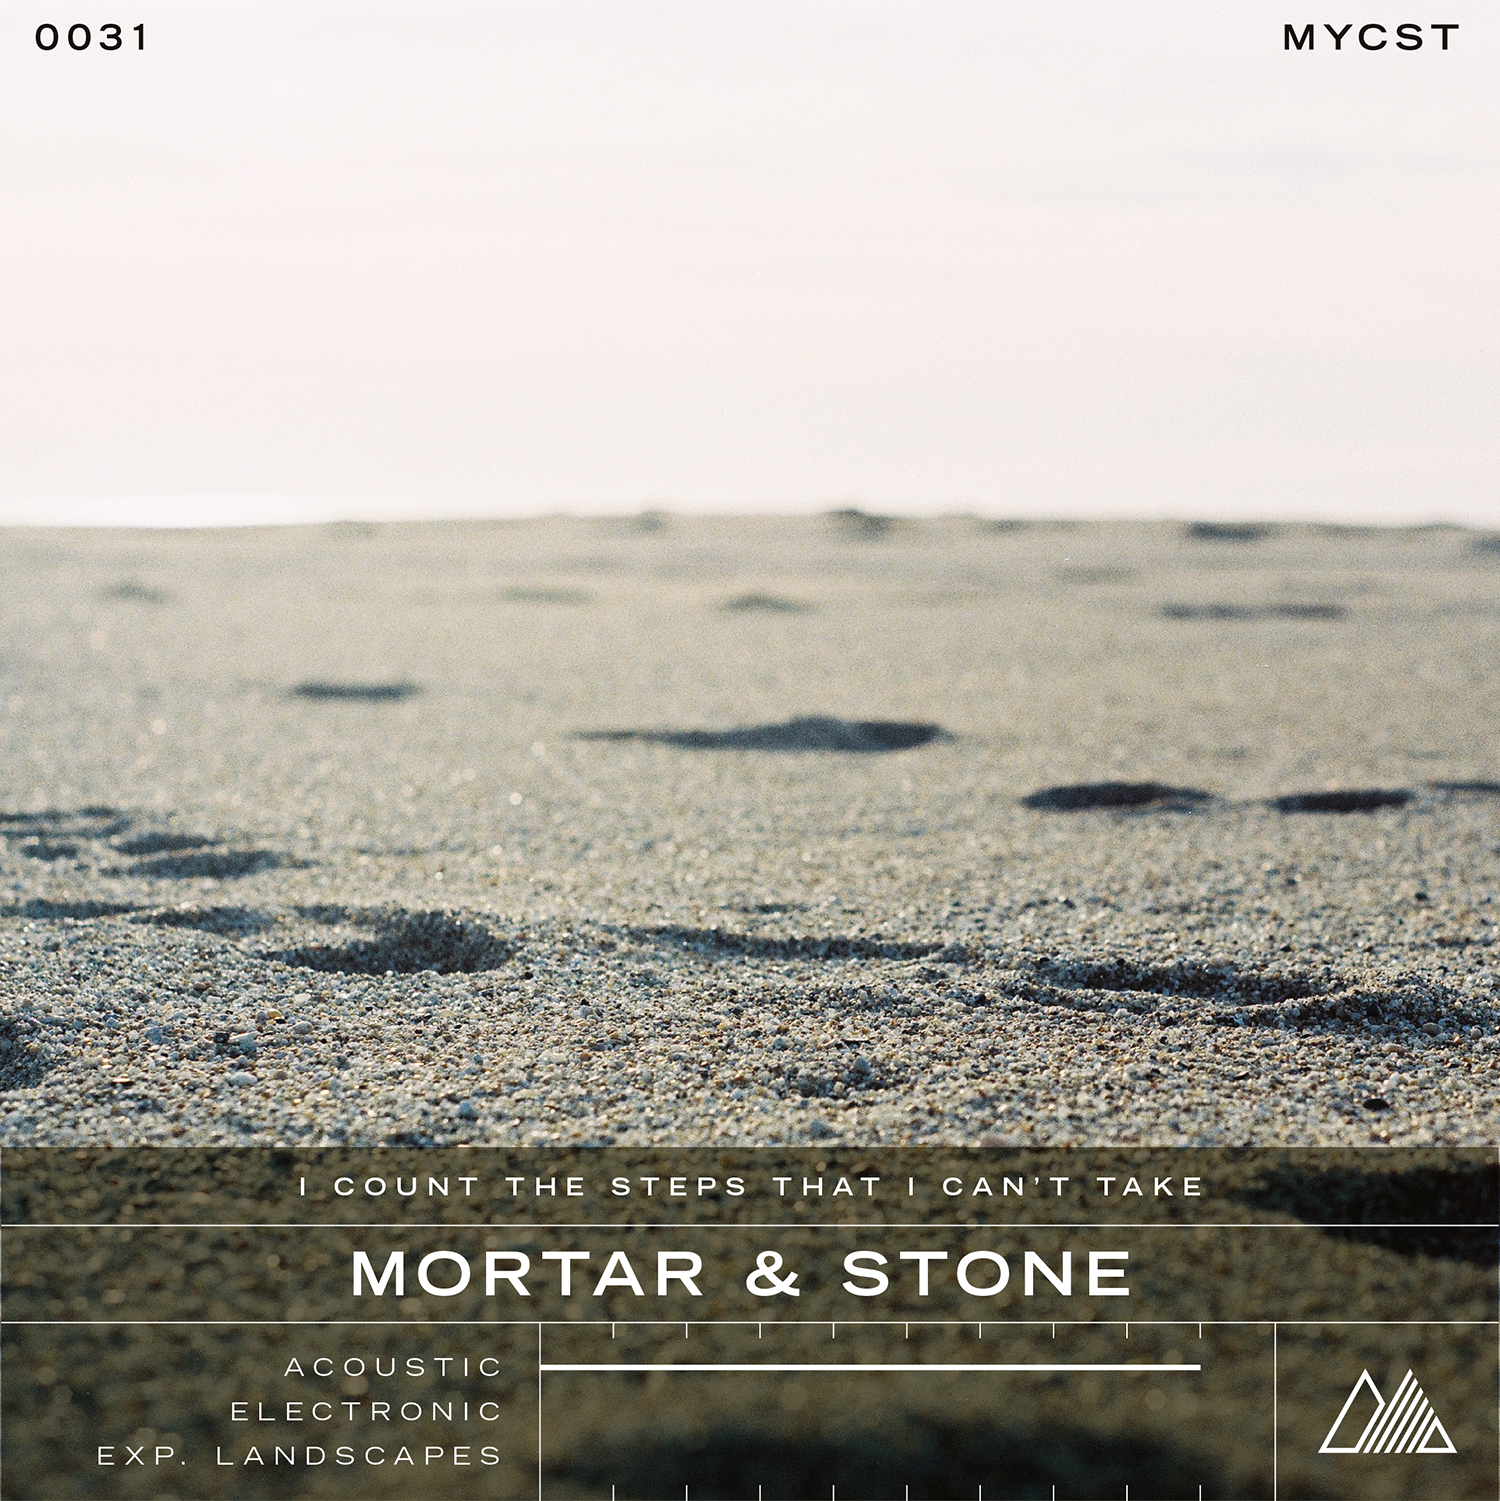 Mortar and Stone